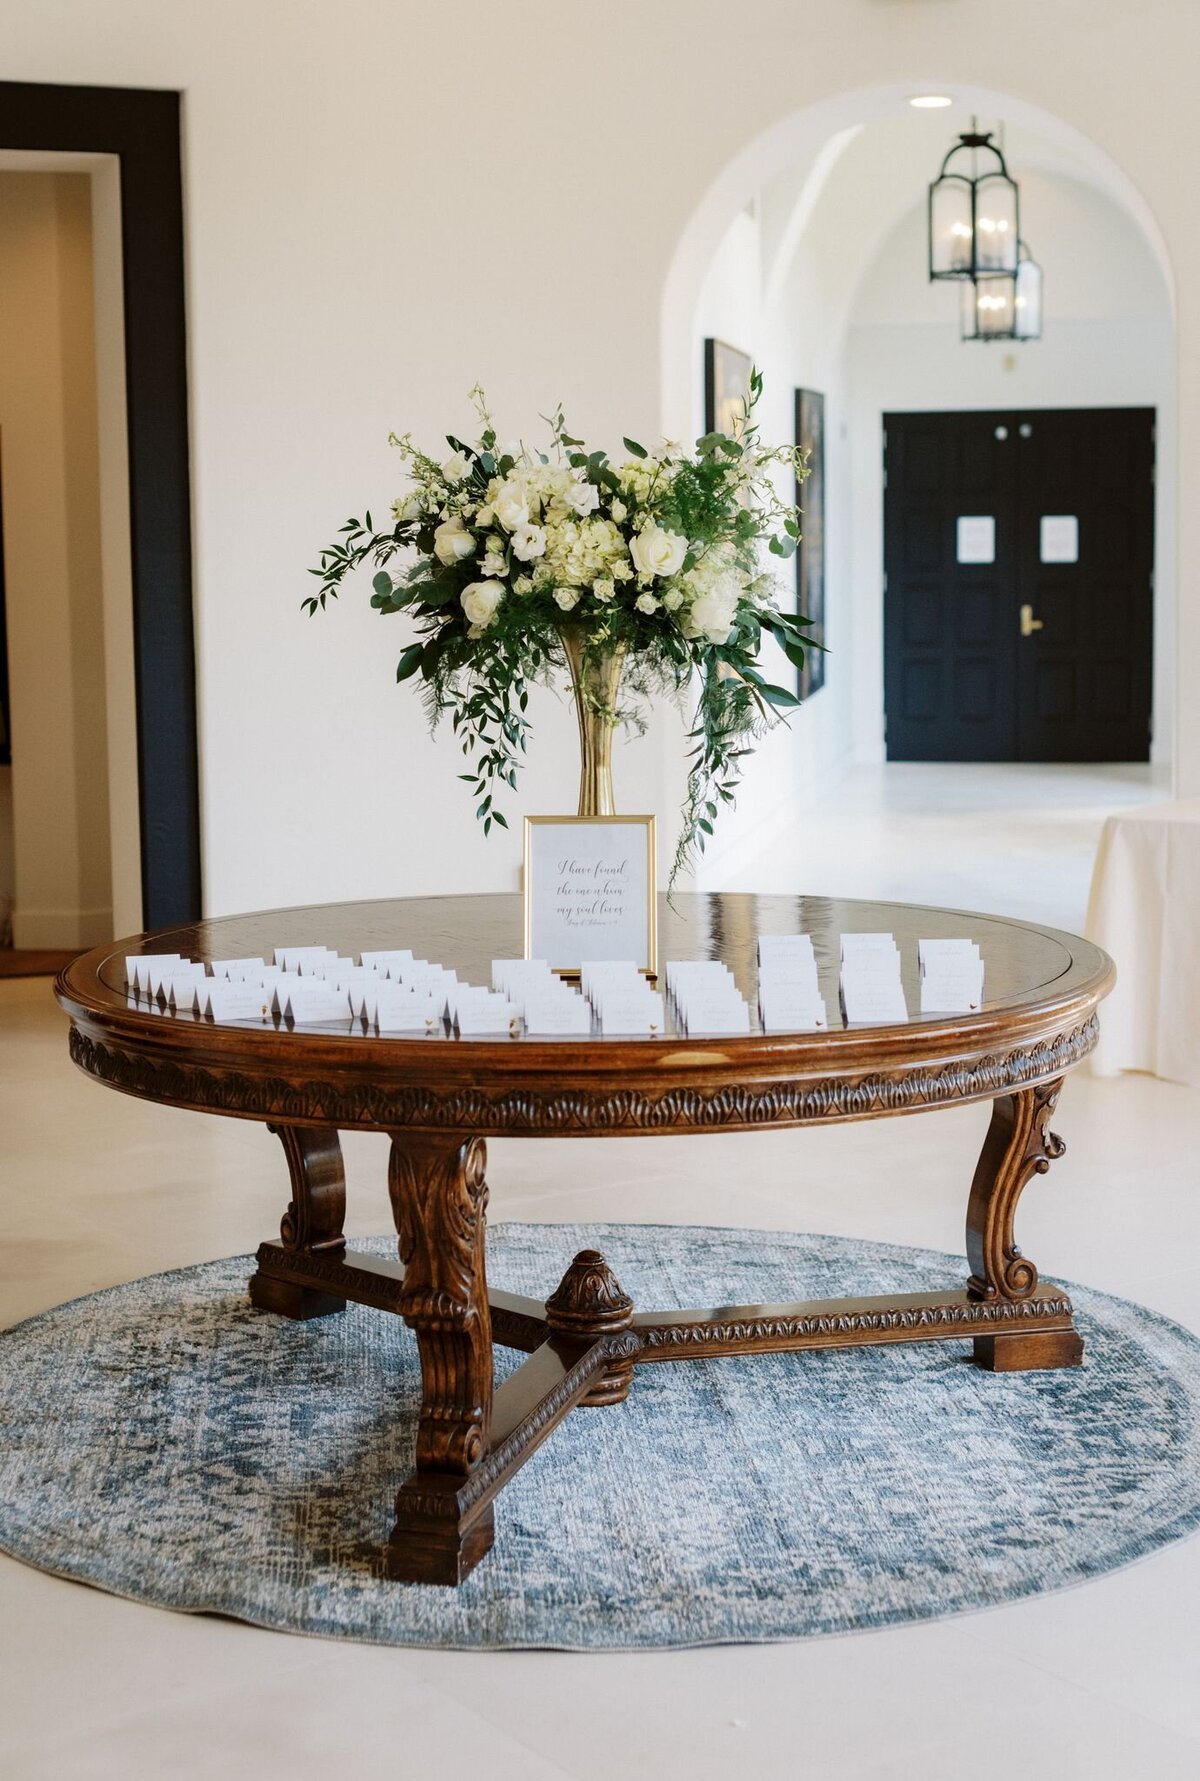 A minimalist bouquet sits next to the seating arrangements for the wedding reception.